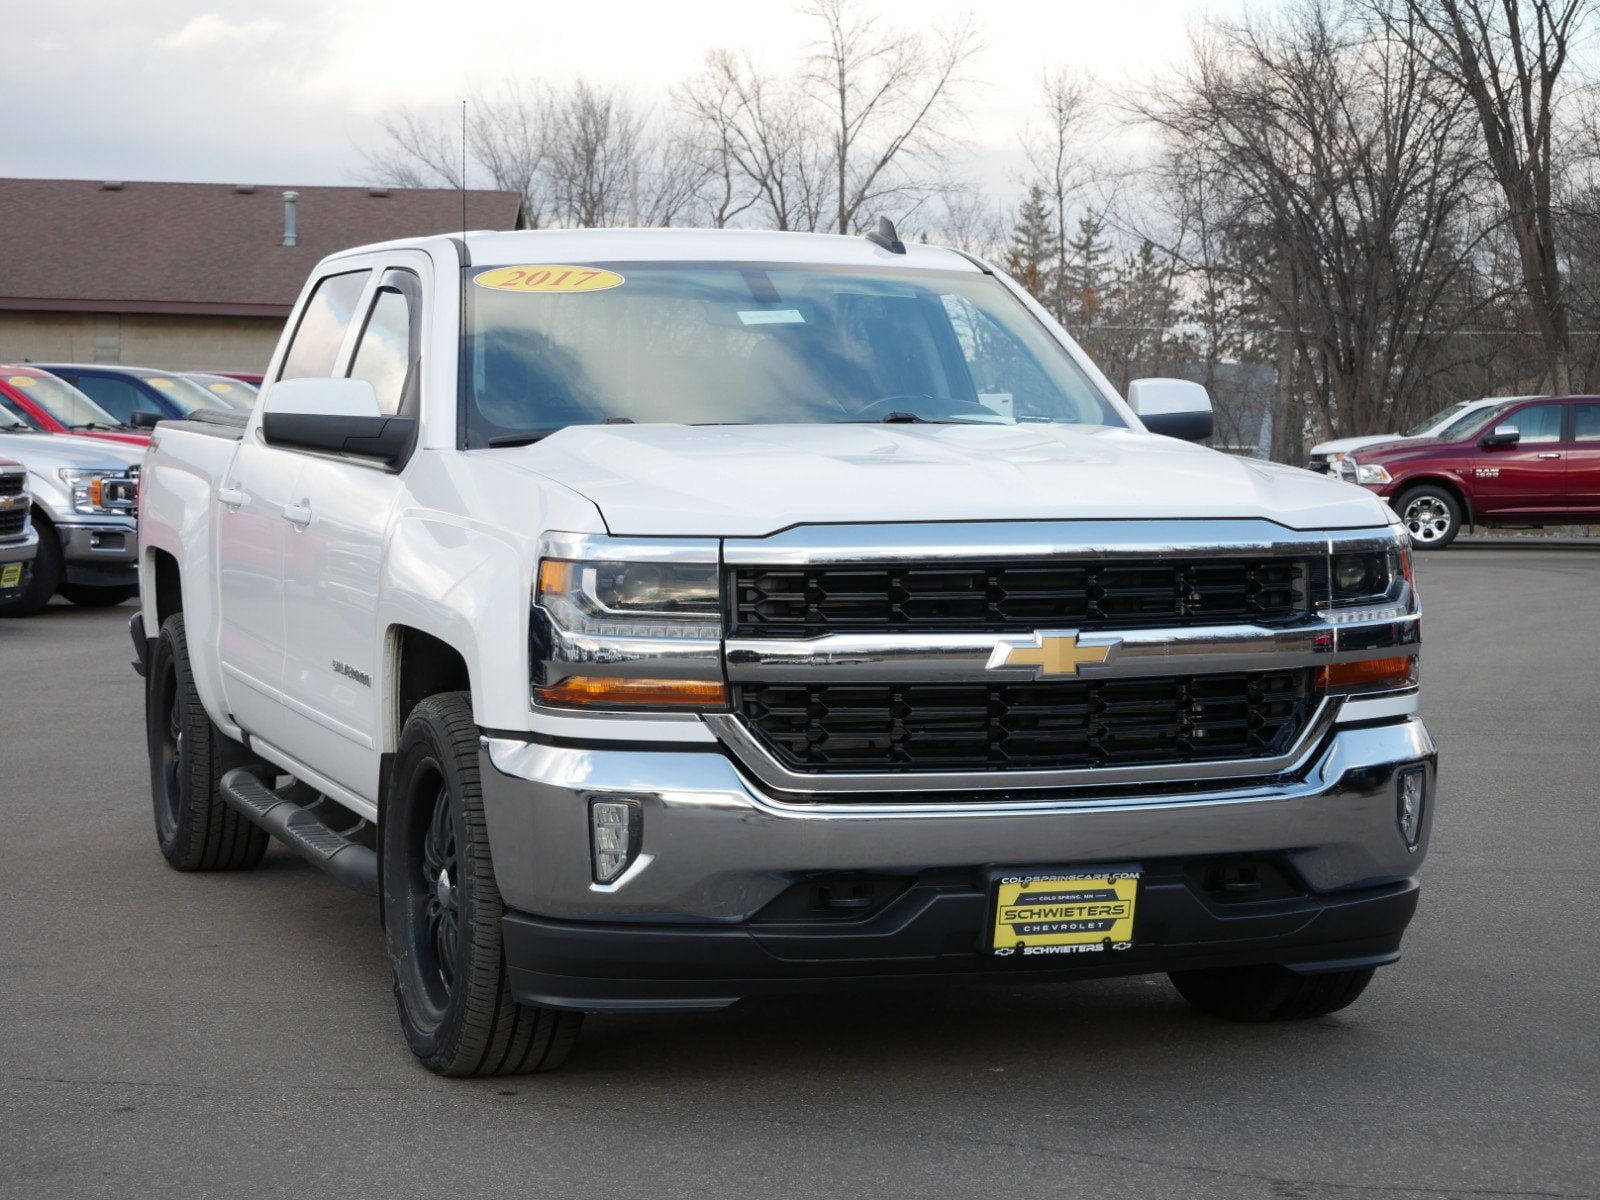 Used 2017 Chevrolet Silverado 1500 LT with VIN 3GCUKRECXHG455660 for sale in Cold Spring, Minnesota